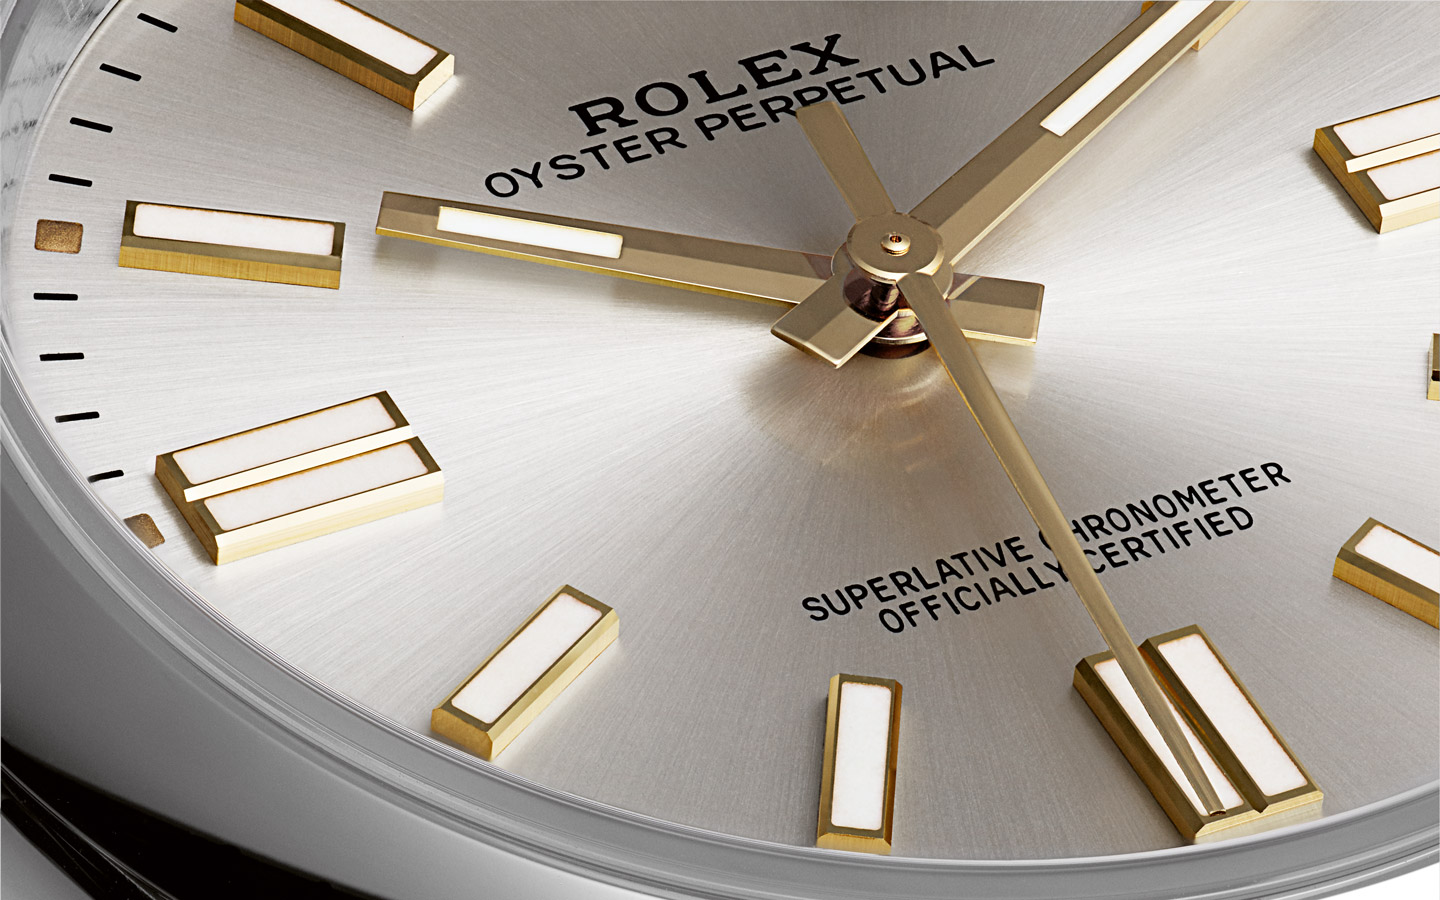 The Rolex Oyster Perpetual